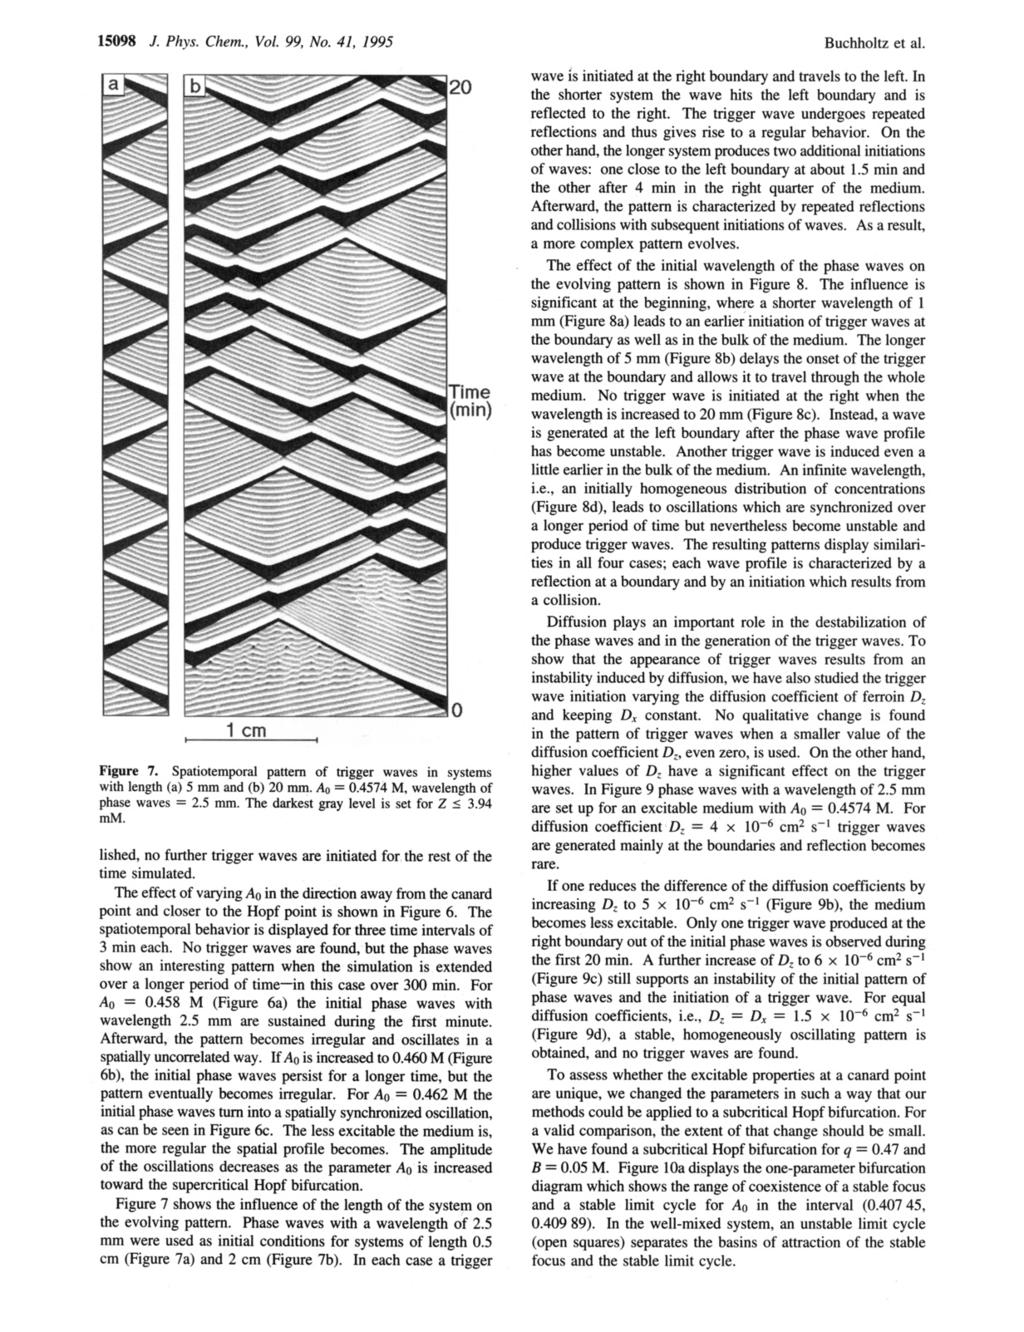 1598 J. Phys. Chem., Vol. 99, No. 41, 1995 Buchholtz et al. H!! Time Figure 7. Spatiotemporal pattern of trigger waves in systems with length (a) 5 mm and (b) mm. A =.